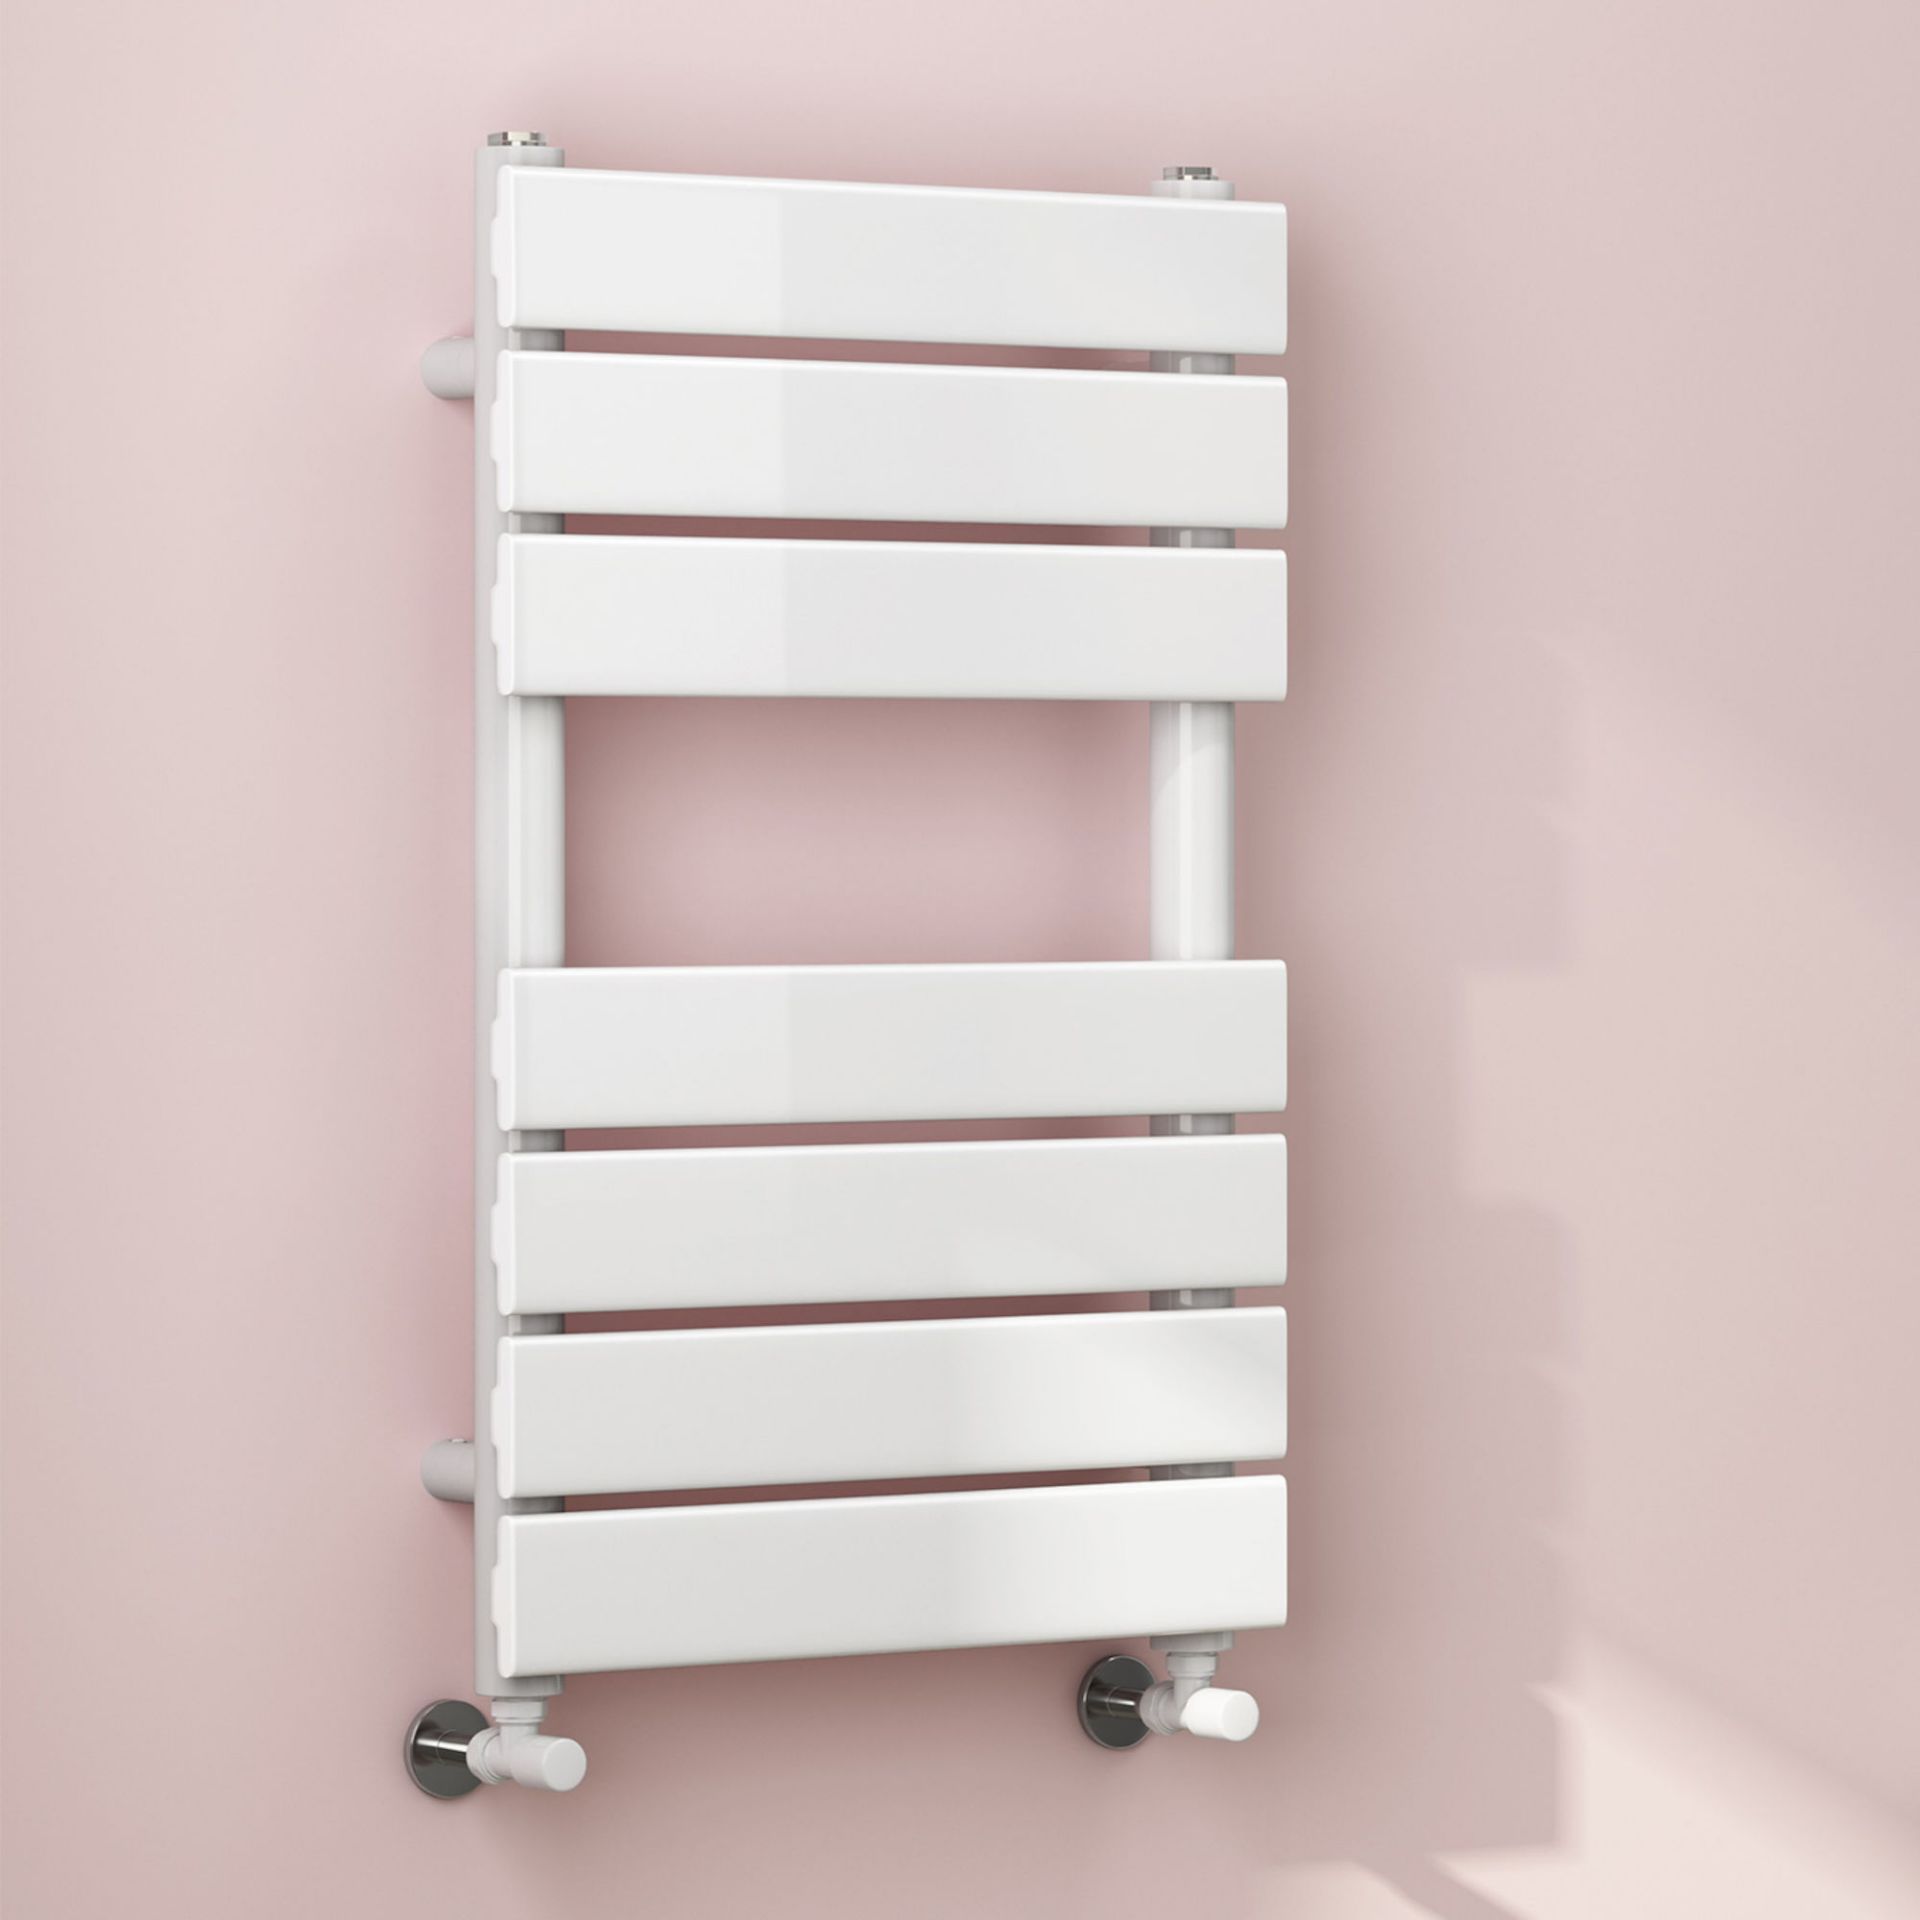 (XM108) 650x400mm White Flat Panel Ladder Towel Radiator. Made from low carbon steel with a high